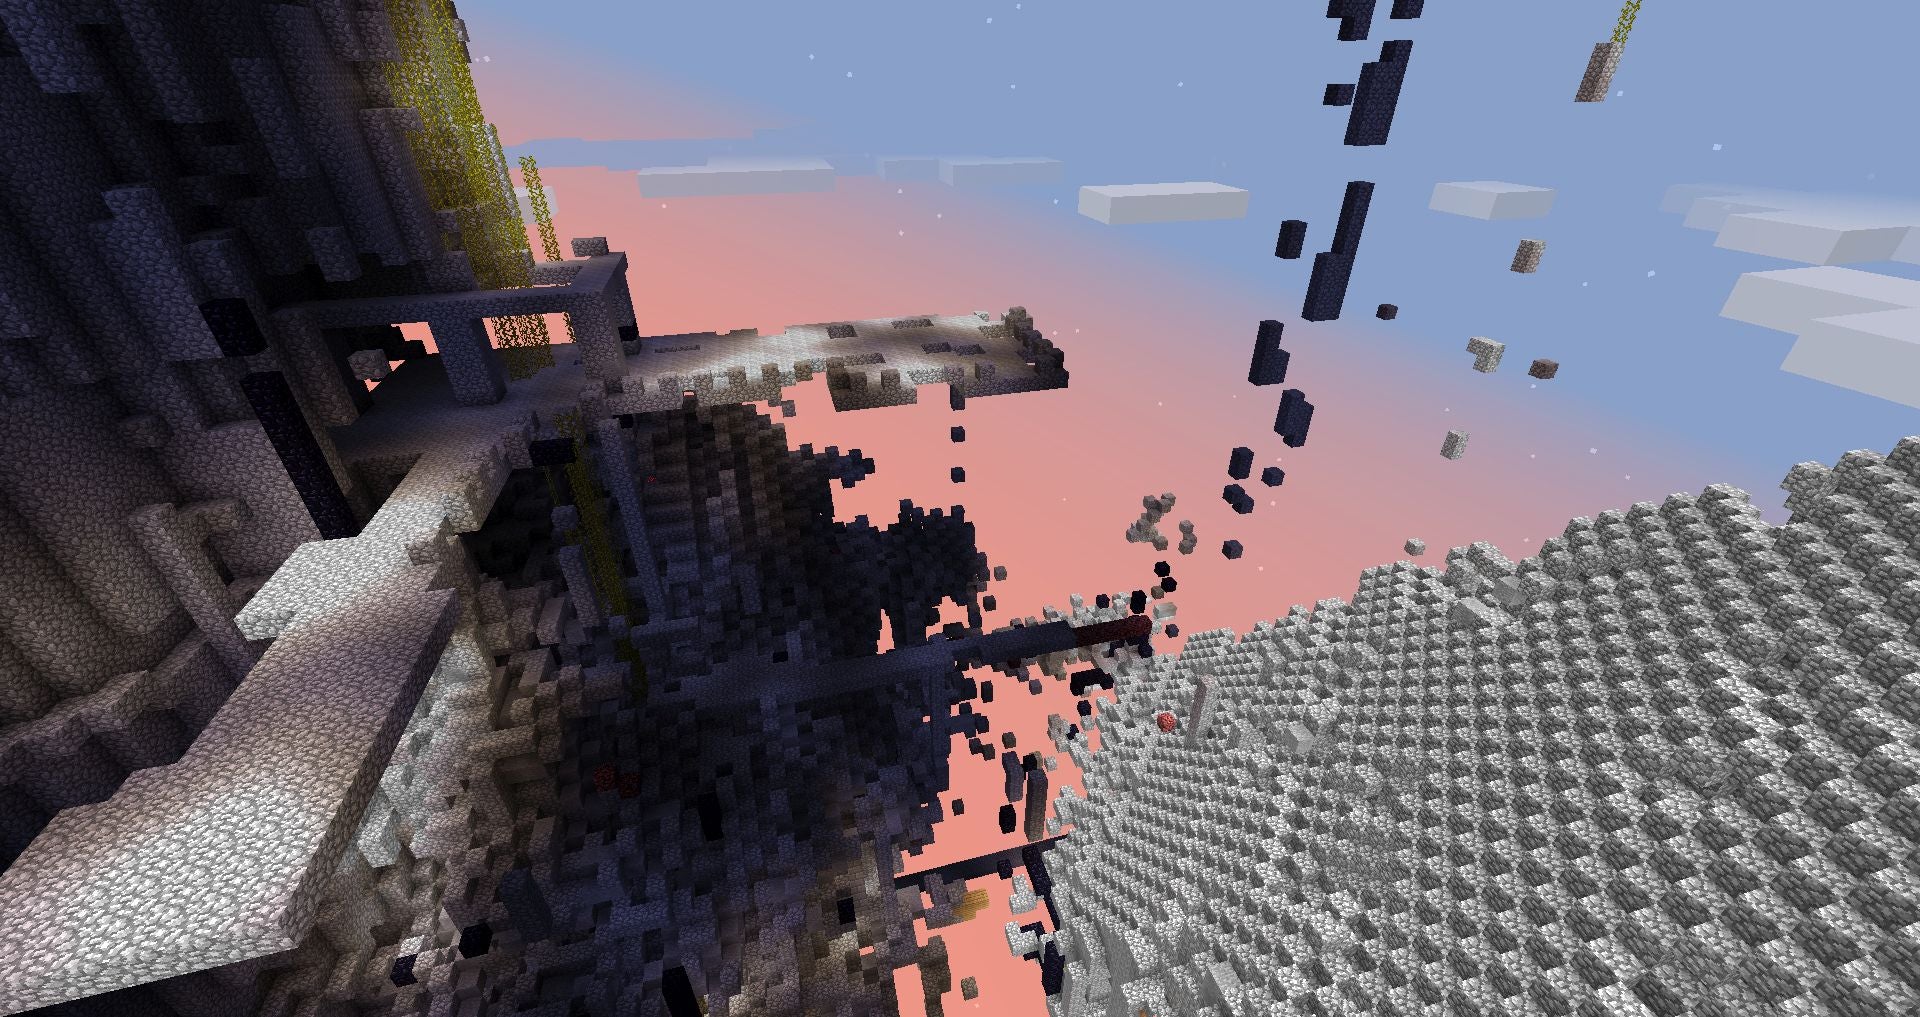 Lusting for ruin on Minecrafts most apocalyptic server Rock Paper Shotgun